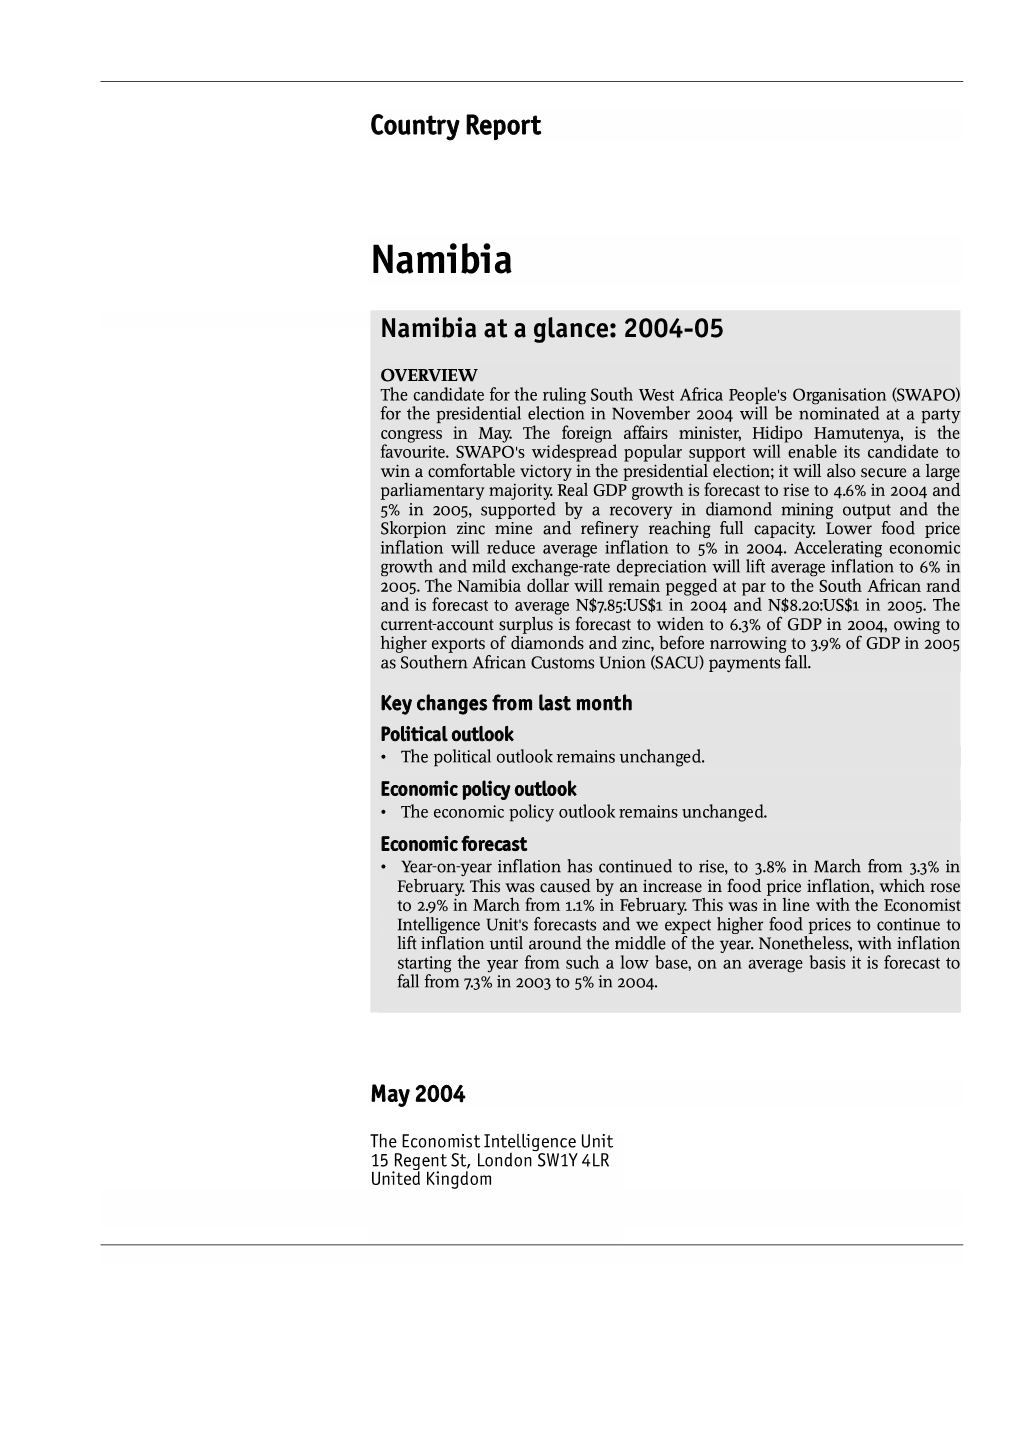 Namibia at a Glance: 2004-05